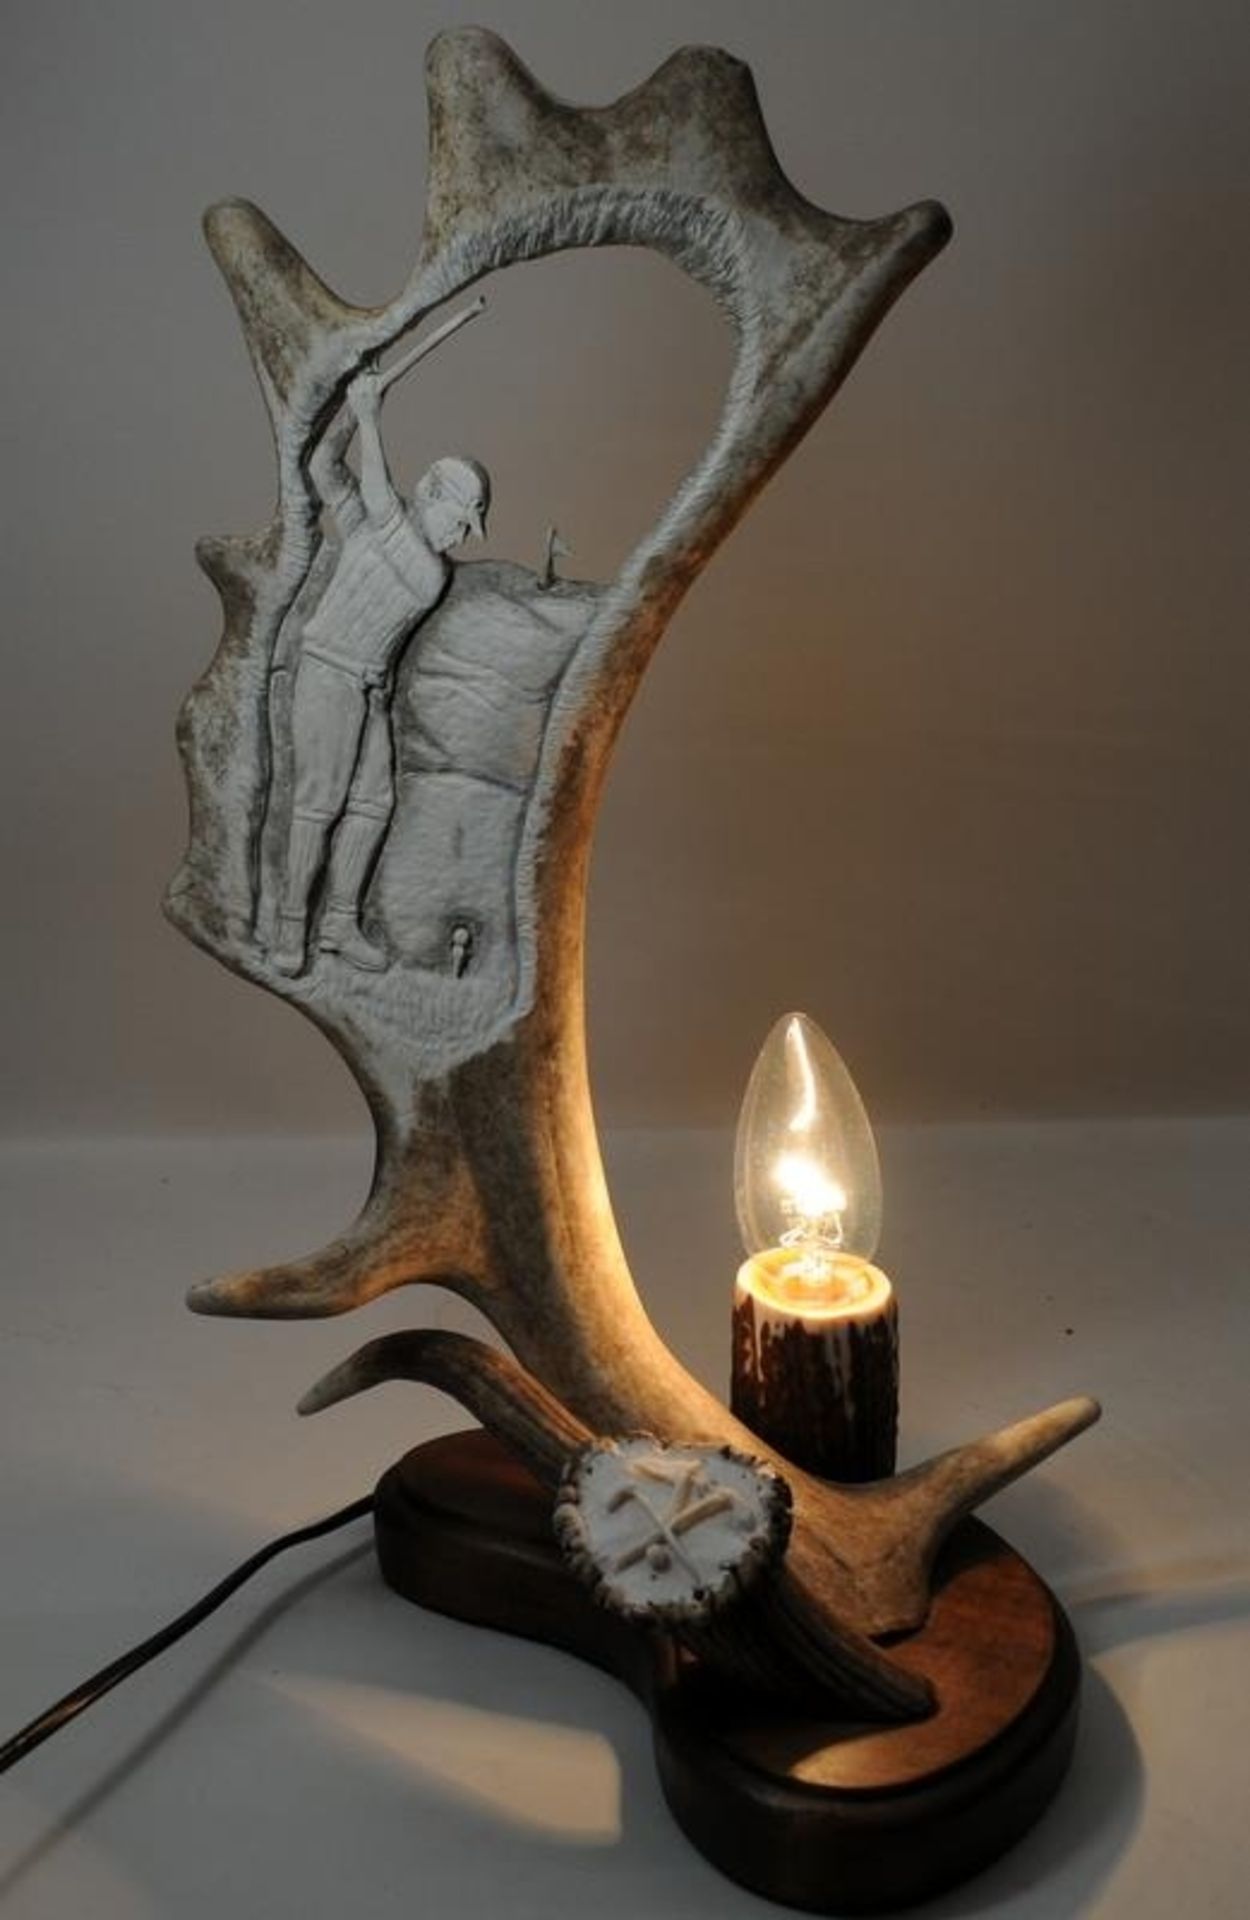 Antler horn with incised carving on a golfing theme. Mounted on a wooden base and incorporating a - Image 3 of 3